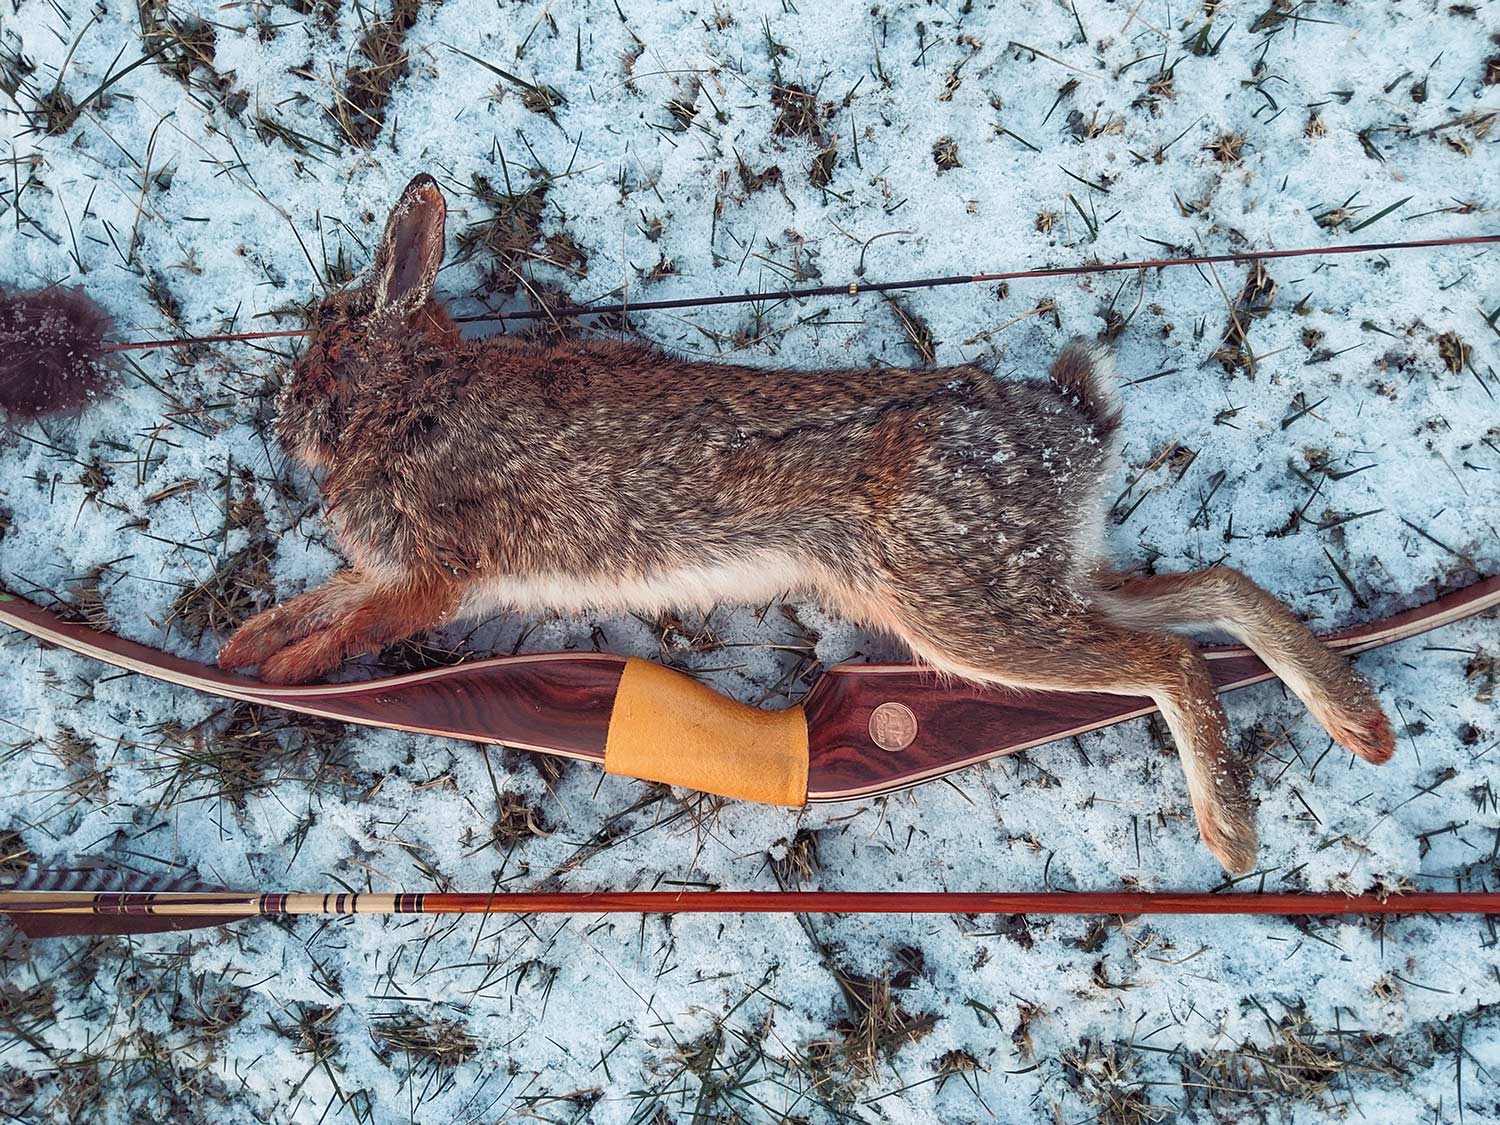 A small rabbit on the snowy ground next to a bow and arrow.